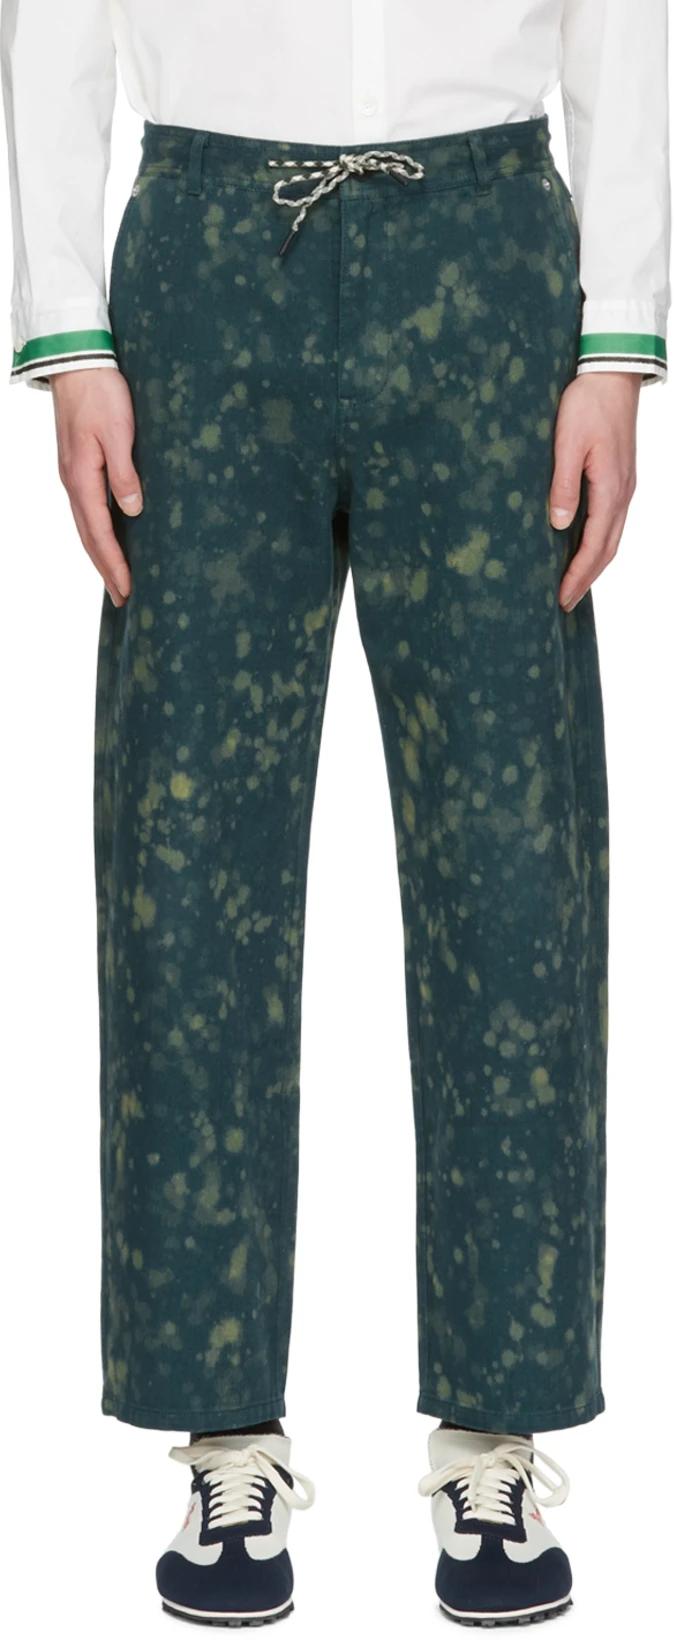 Green Tie-Dye Jeans by A PERSONAL NOTE 73